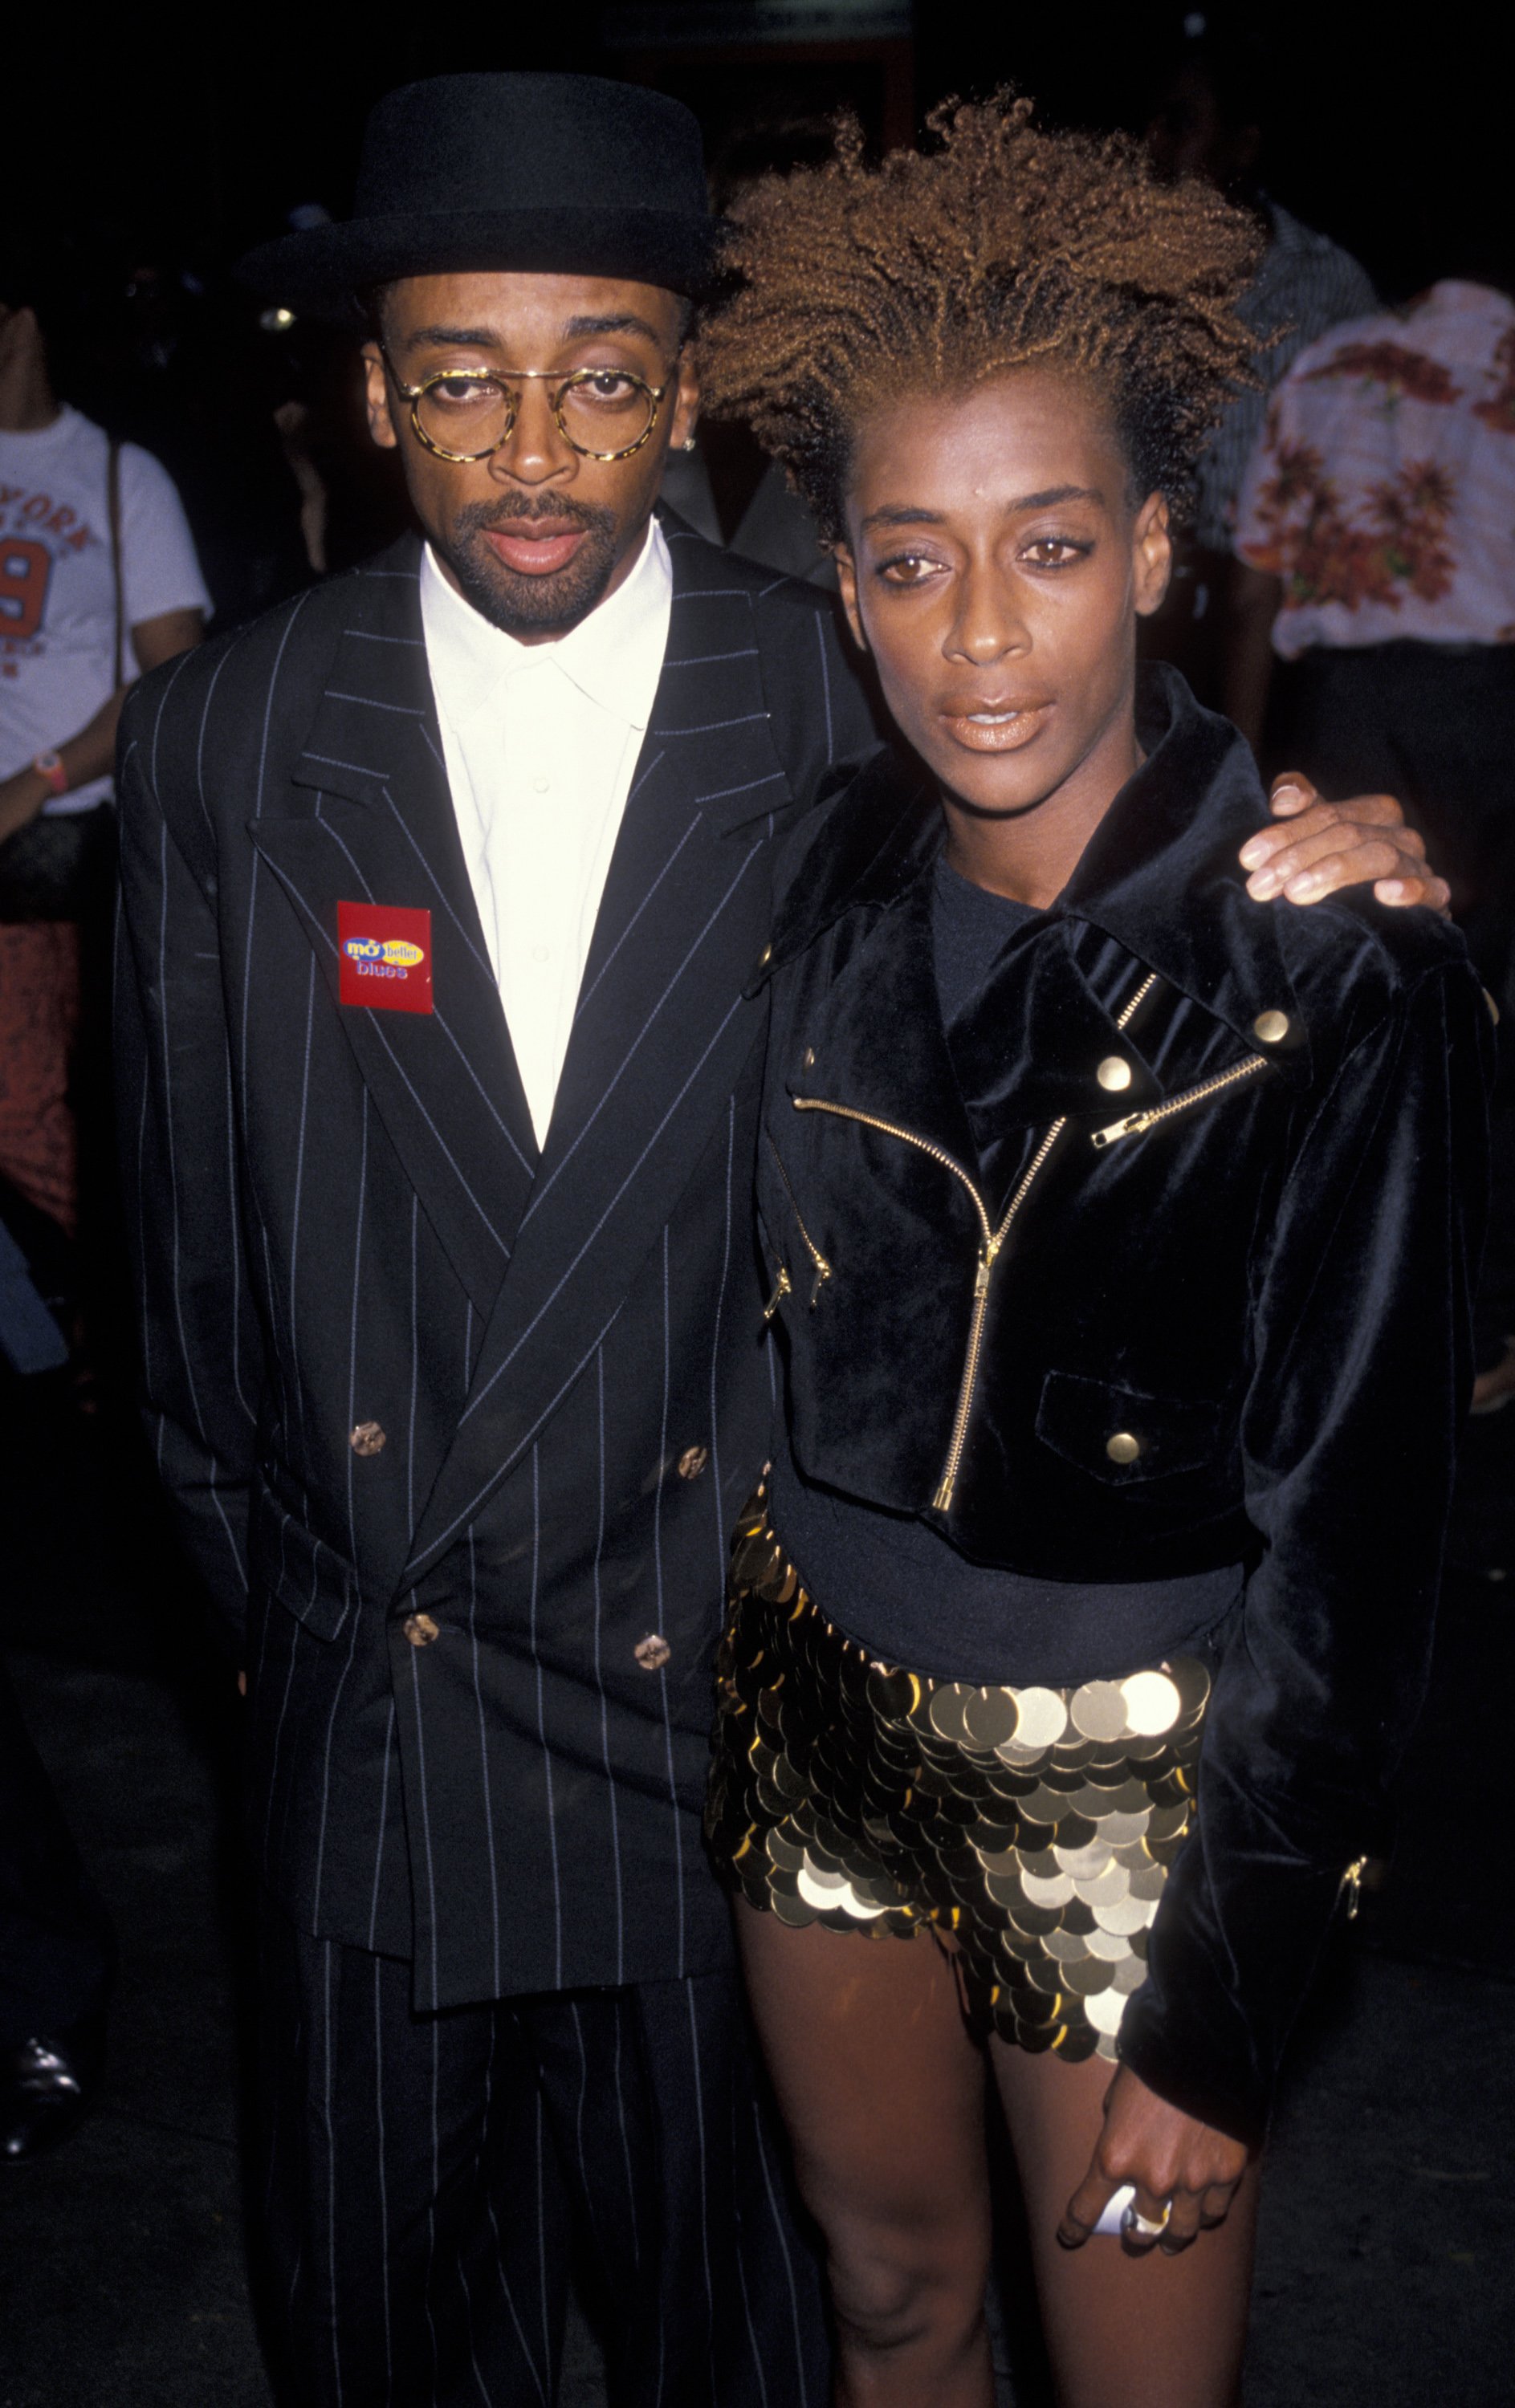 Spike Lee and his sister Joie Lee are photographed the premiere of 'Mo' Better Blues' on July 23, 1990, at the Ziegfeld Theater in New York City | Source: Getty Images